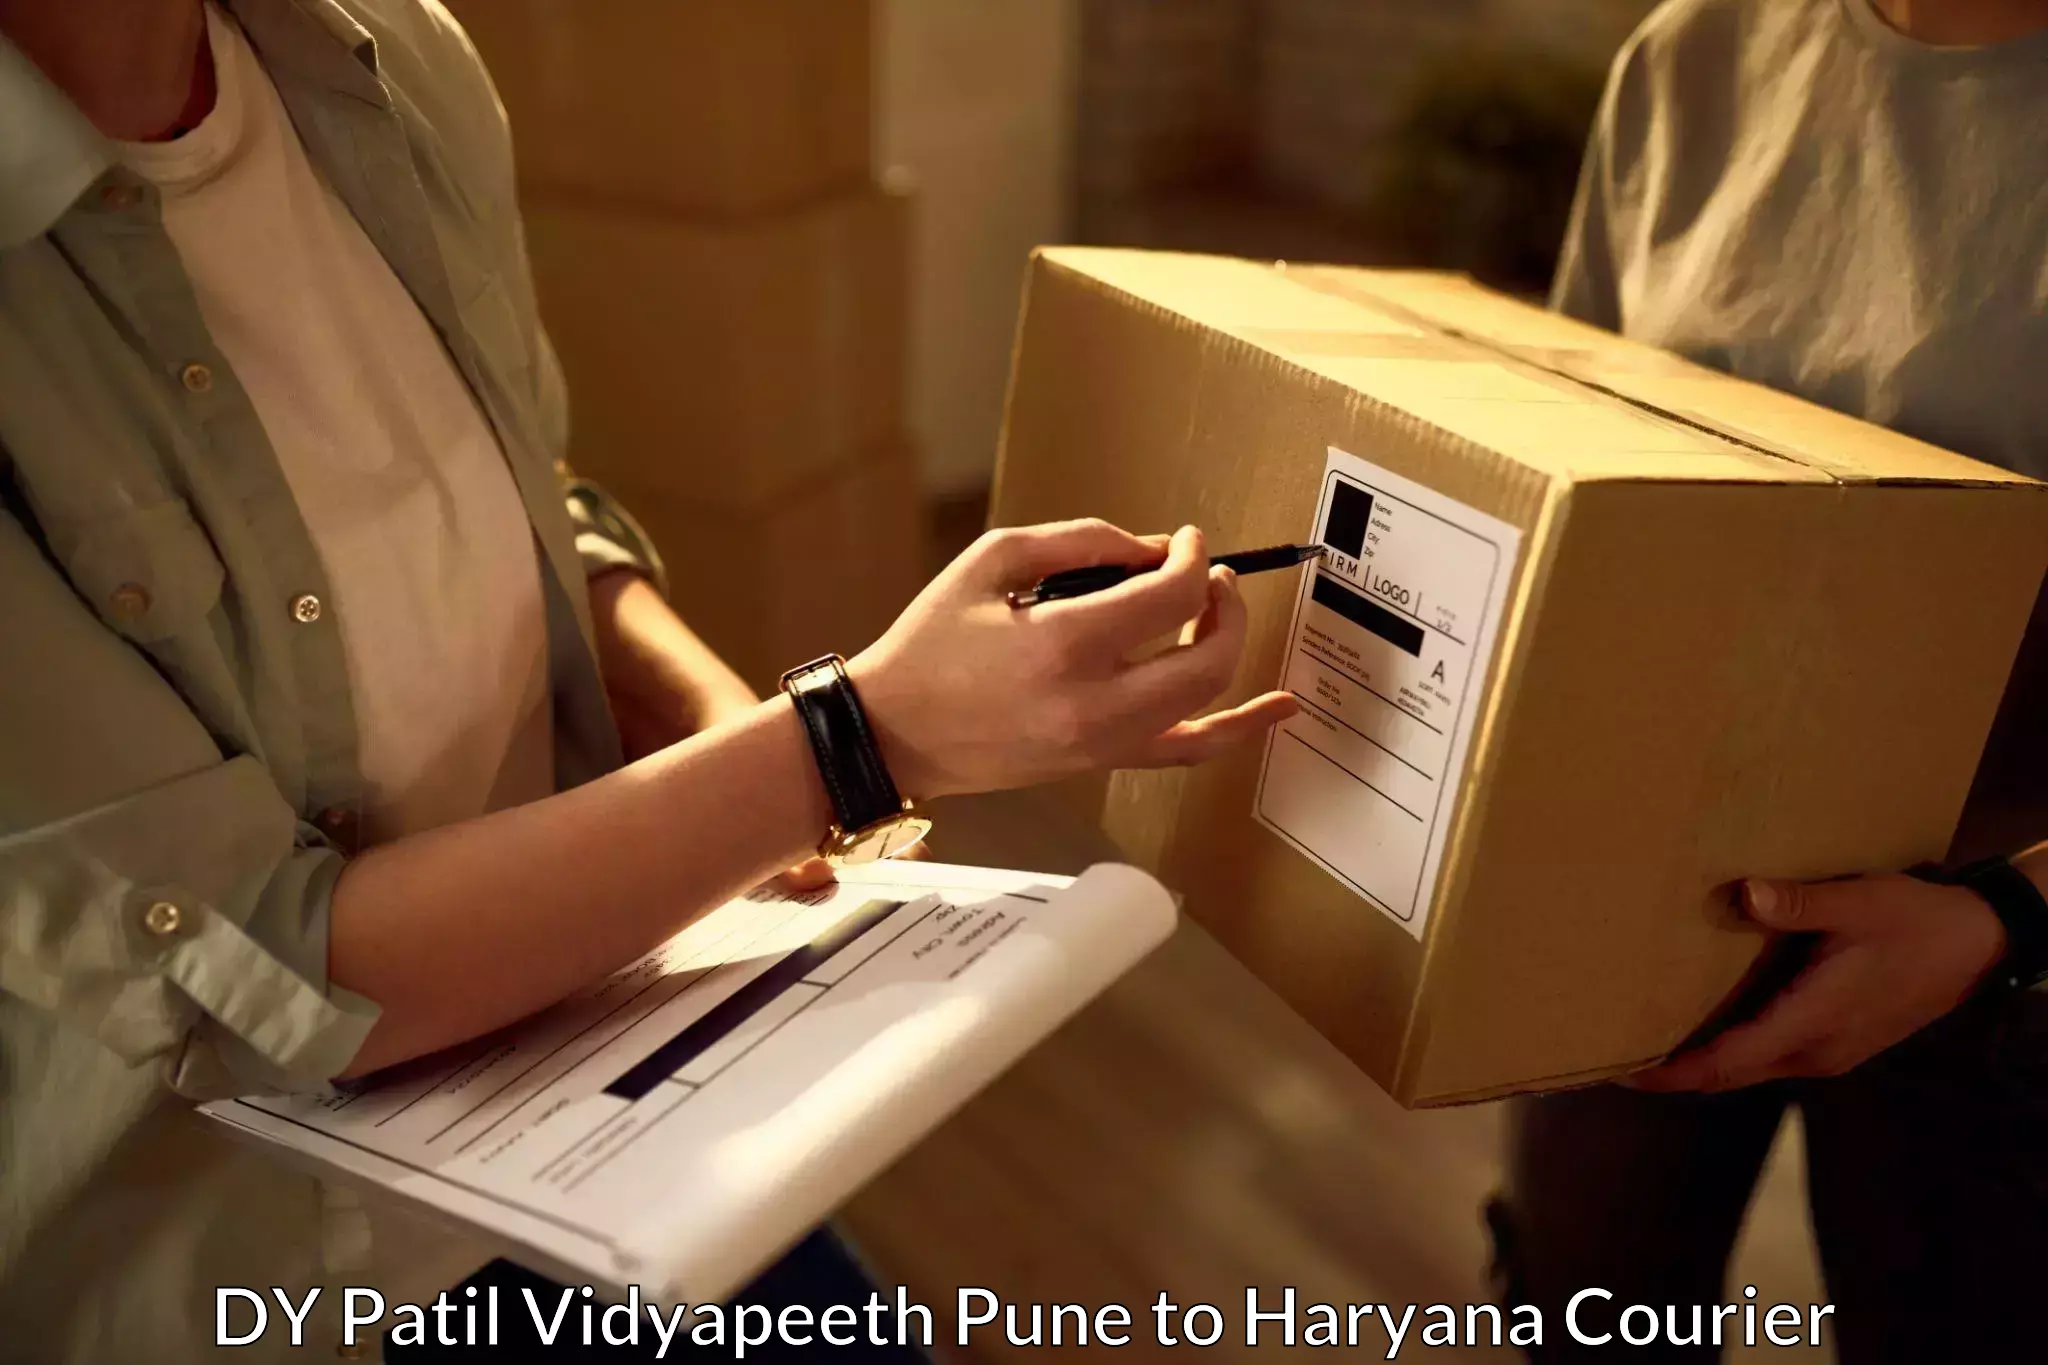 Nationwide delivery network DY Patil Vidyapeeth Pune to Jhajjar